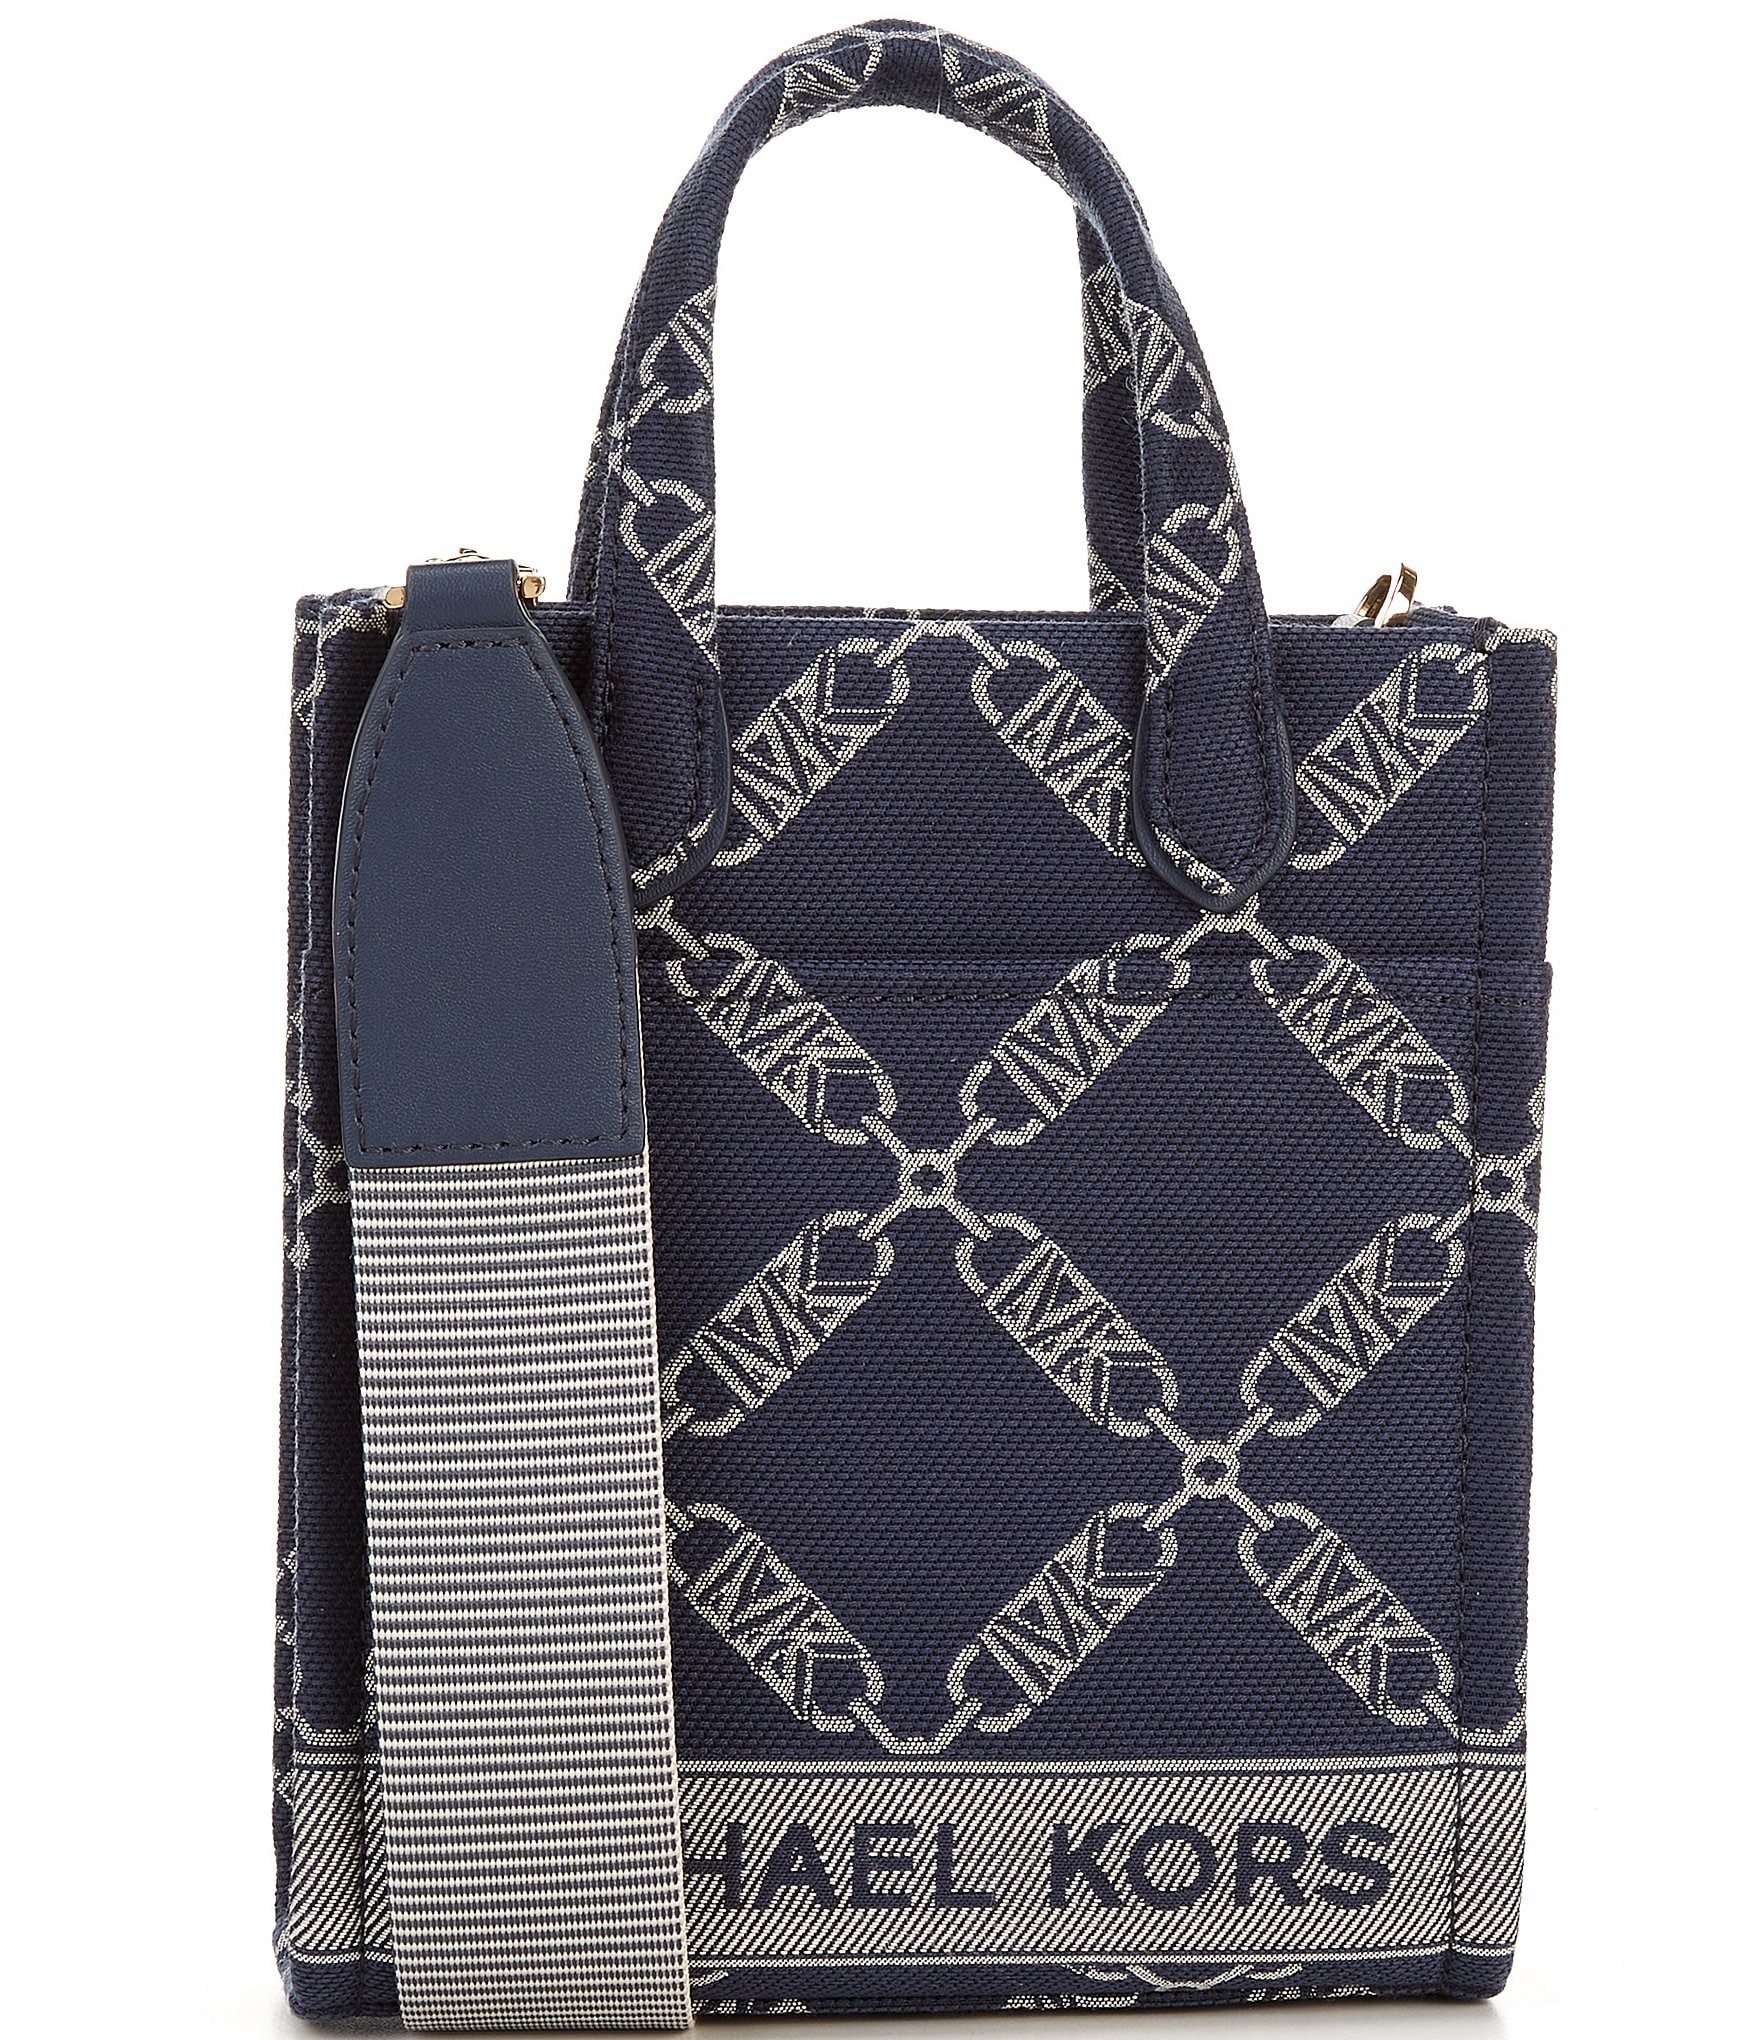  Michael Kors Gigi Extra Small North/South Shopper Tote  Crossbody Navy Multi One Size : Clothing, Shoes & Jewelry